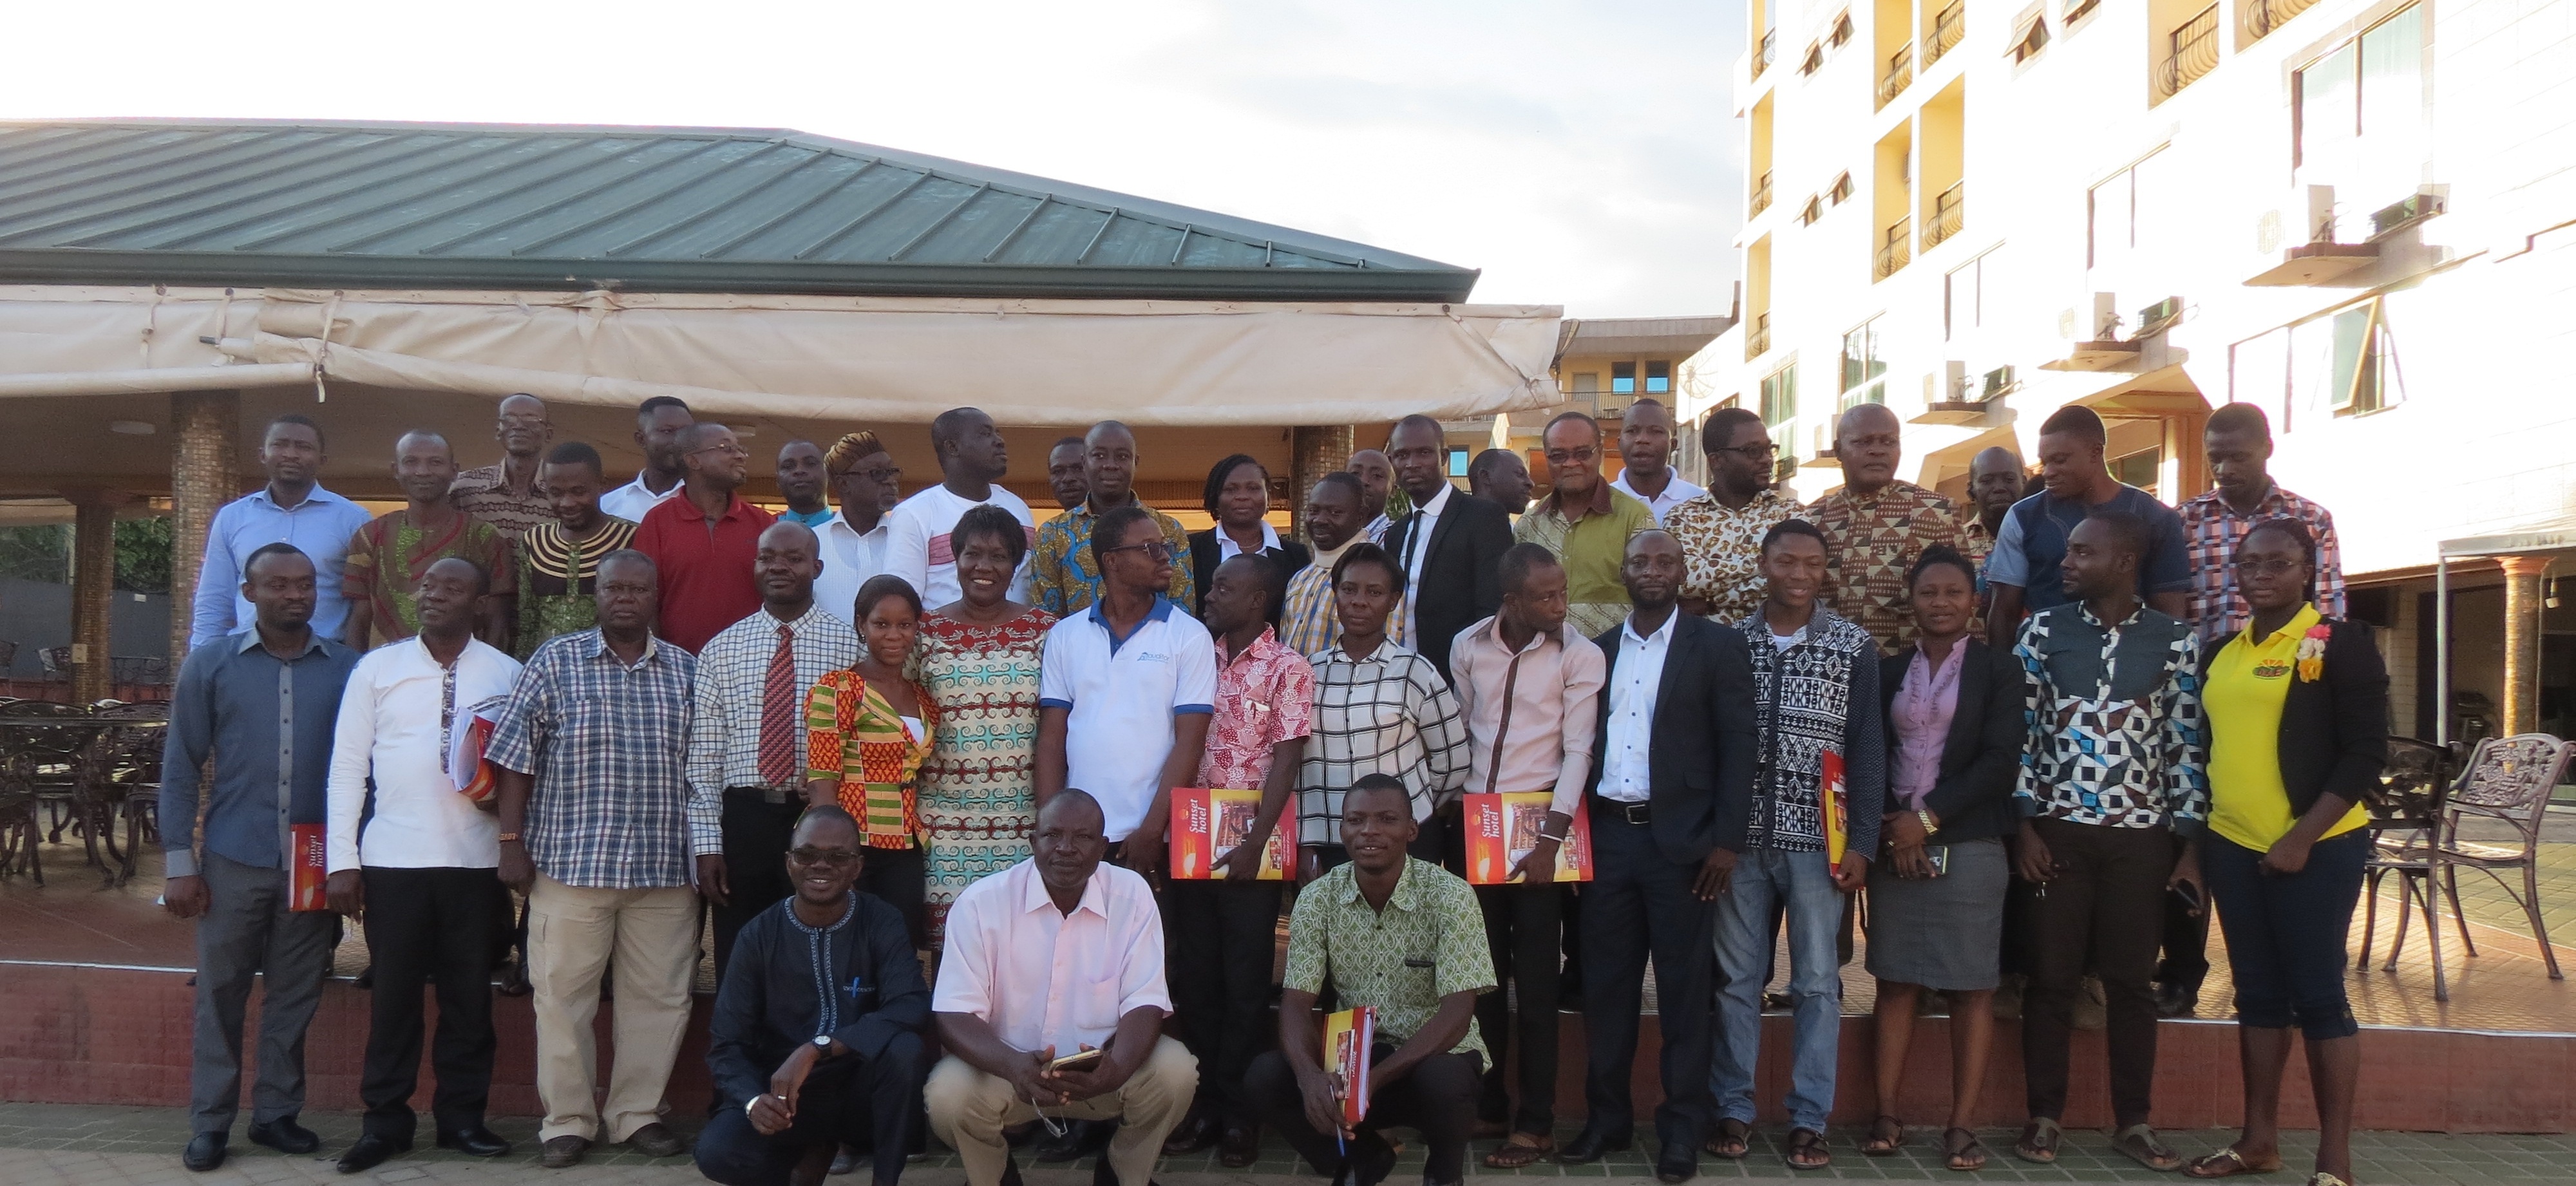 Root Capital staff with members of a focus group from Kumasi, Ghana.